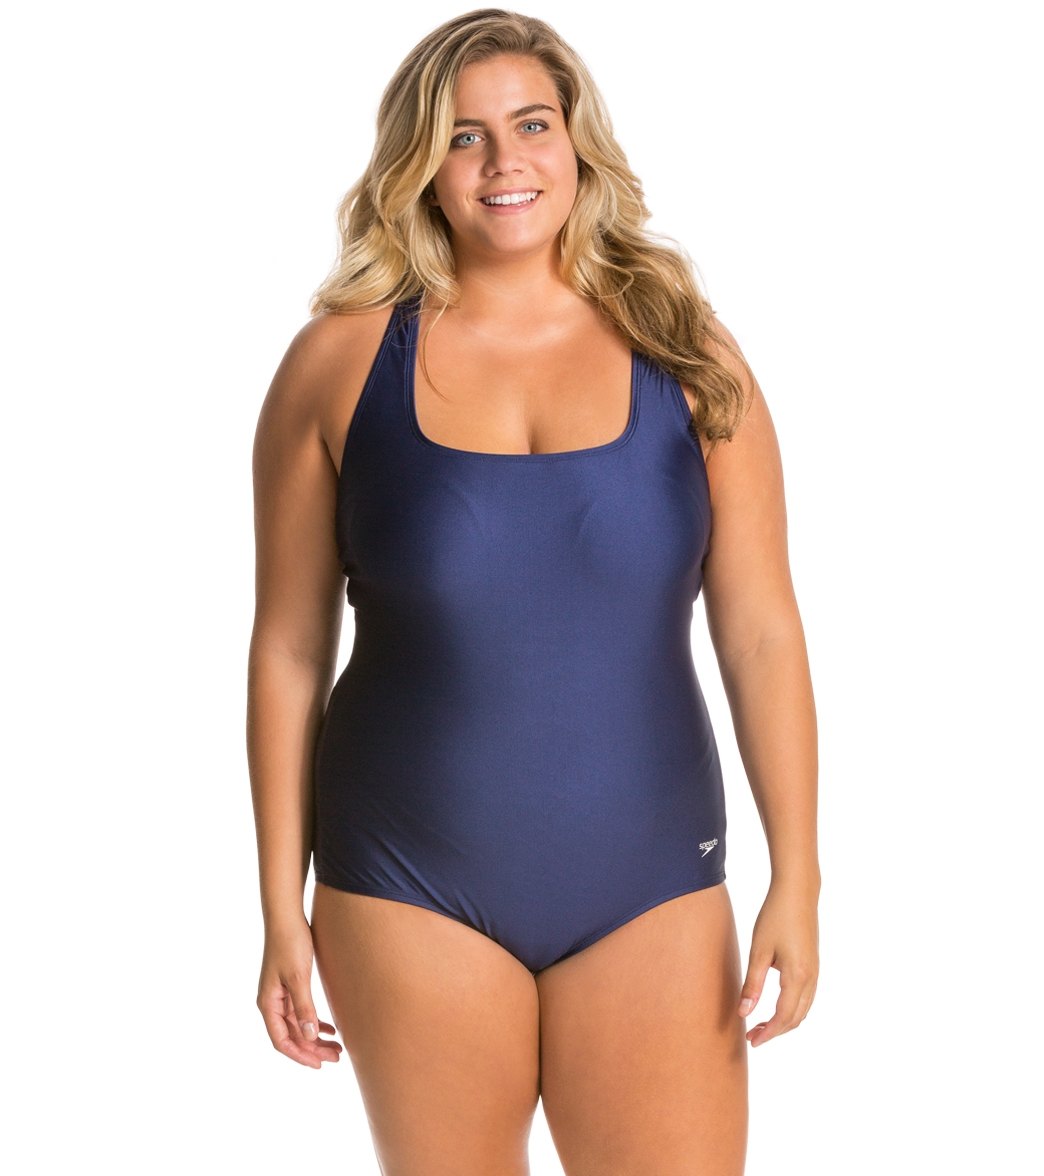 Speedo Moderate Ultraback Plus Size One Piece at SwimOutlet.com